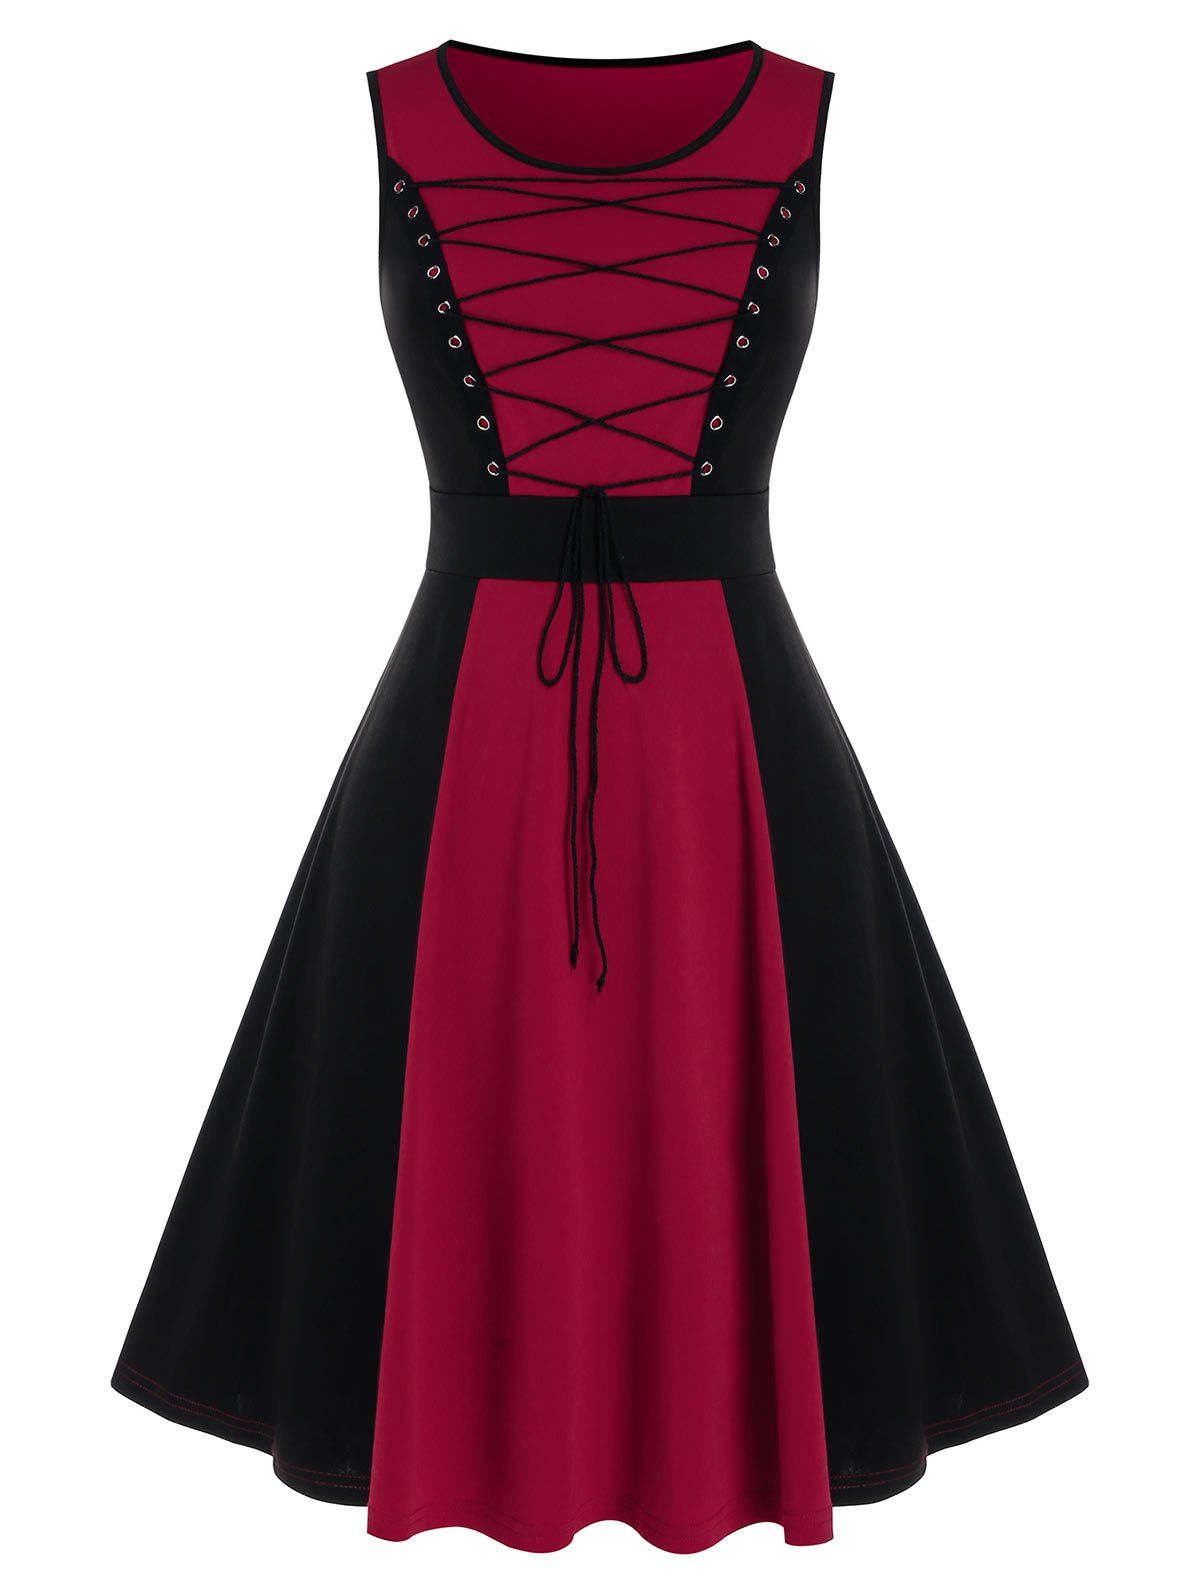 [59% OFF] 2022 Contrast Color Lace Up Sleeveless A Line Dress In RED ...